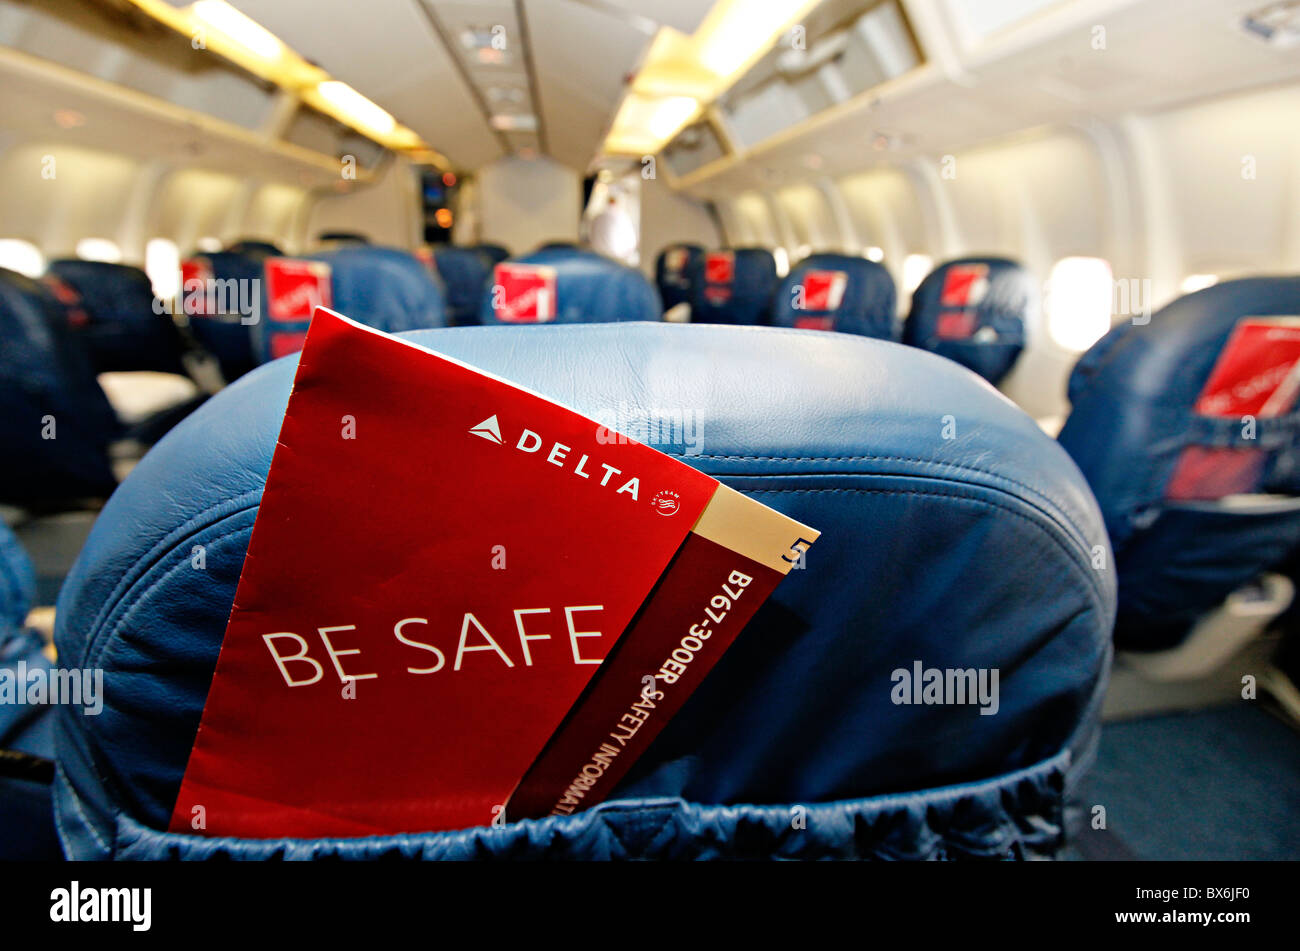 Delta Airlines Airplane Interior Seat Safety Guidelines